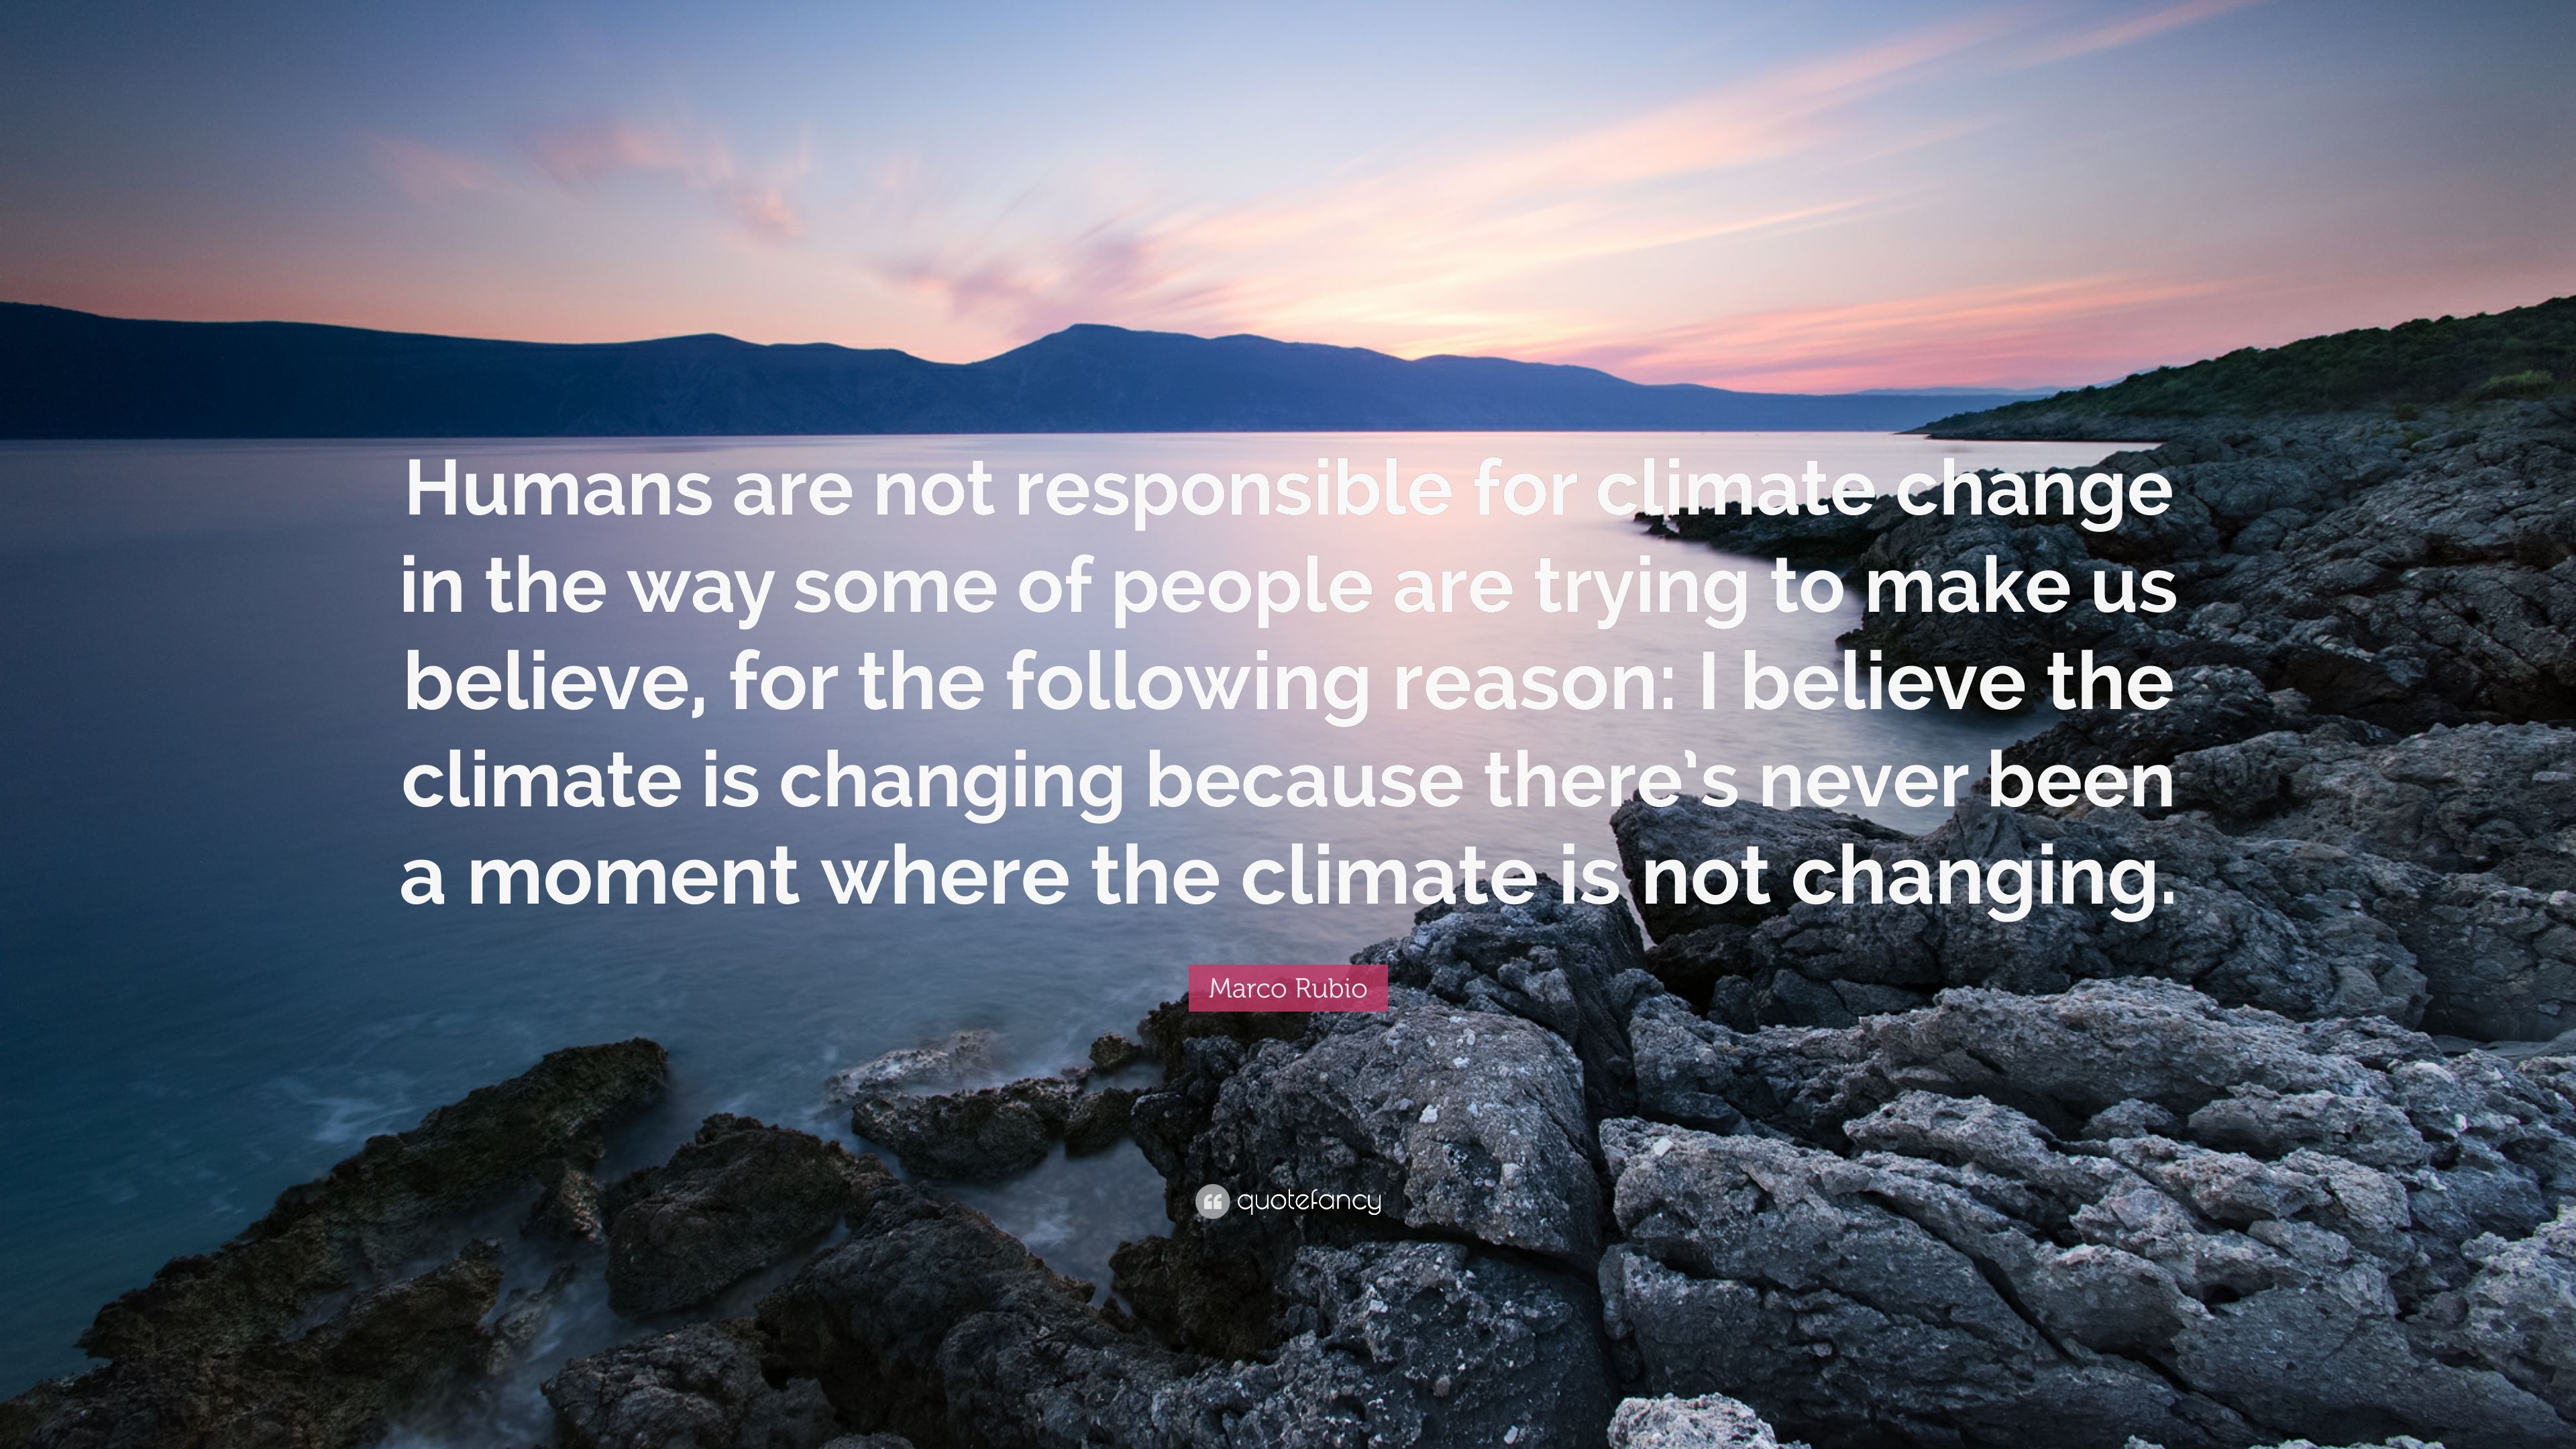 Marco Rubio Quote: “Humans are not responsible for climate change